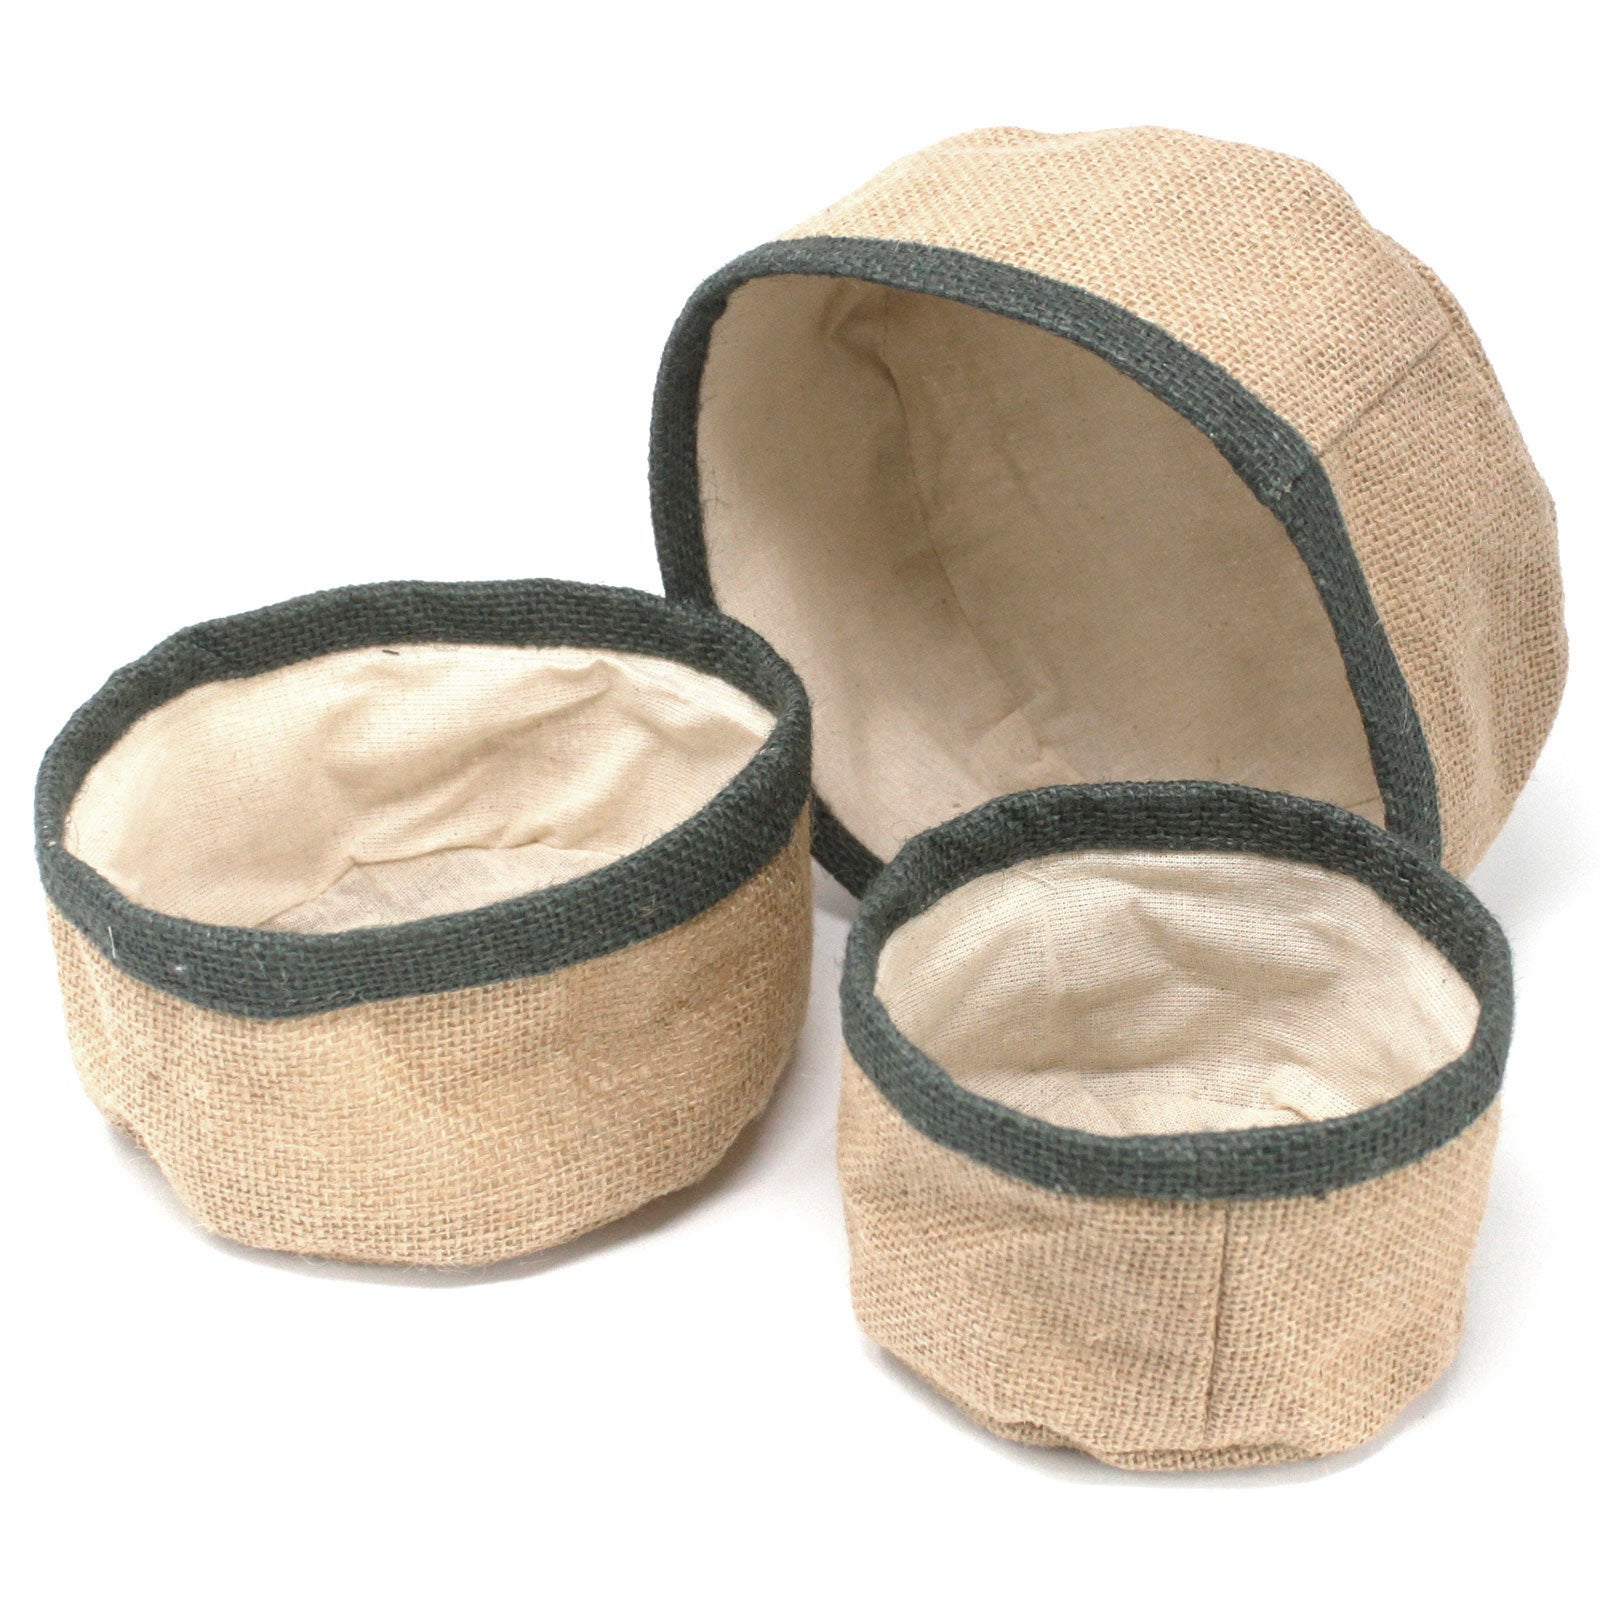 View Set of 3 Natural Jute Baskets Charcoal information